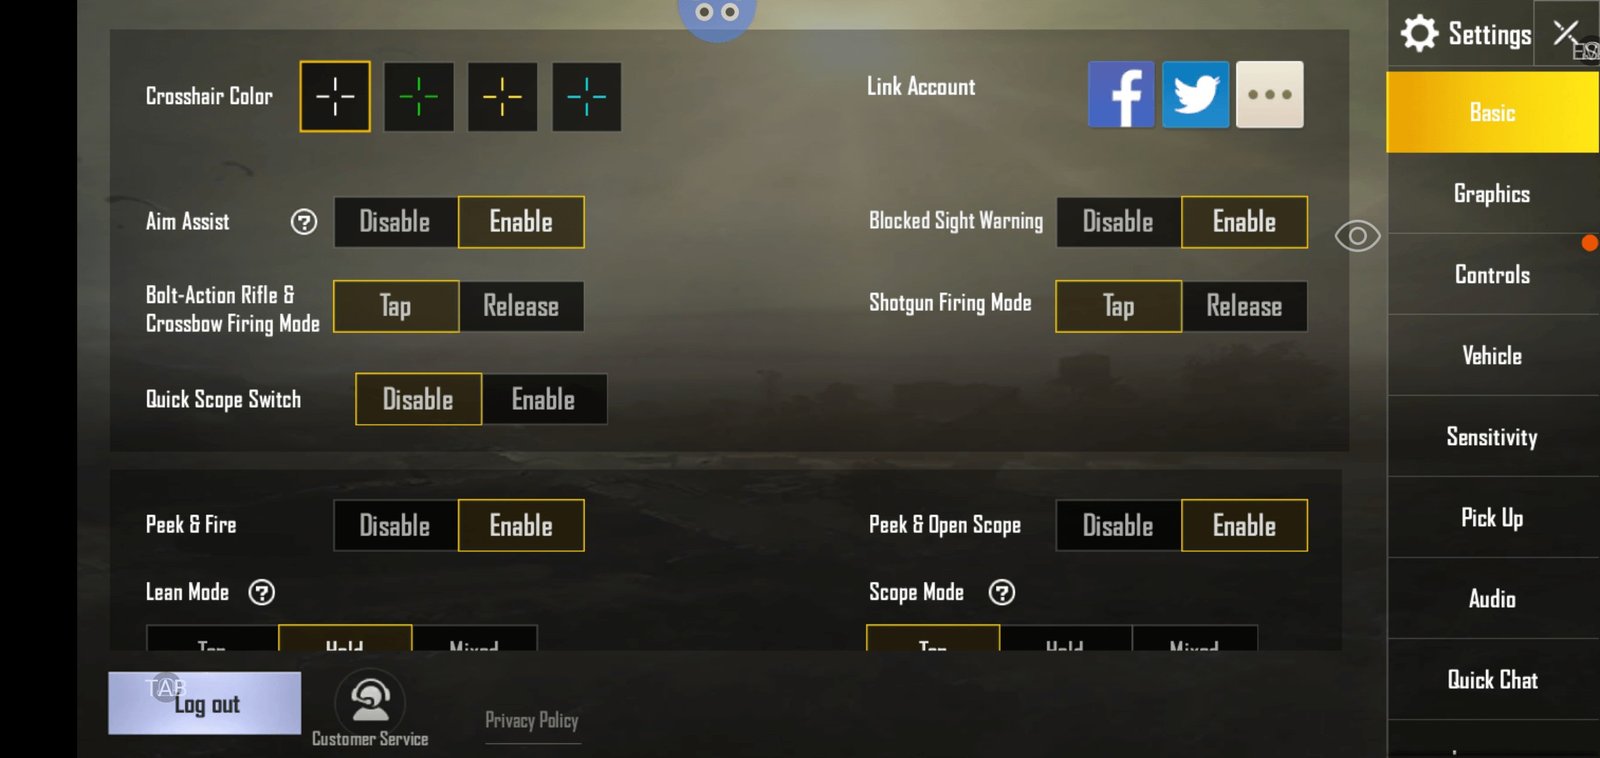 How to use volume buttons to fire in PUBG mobile.